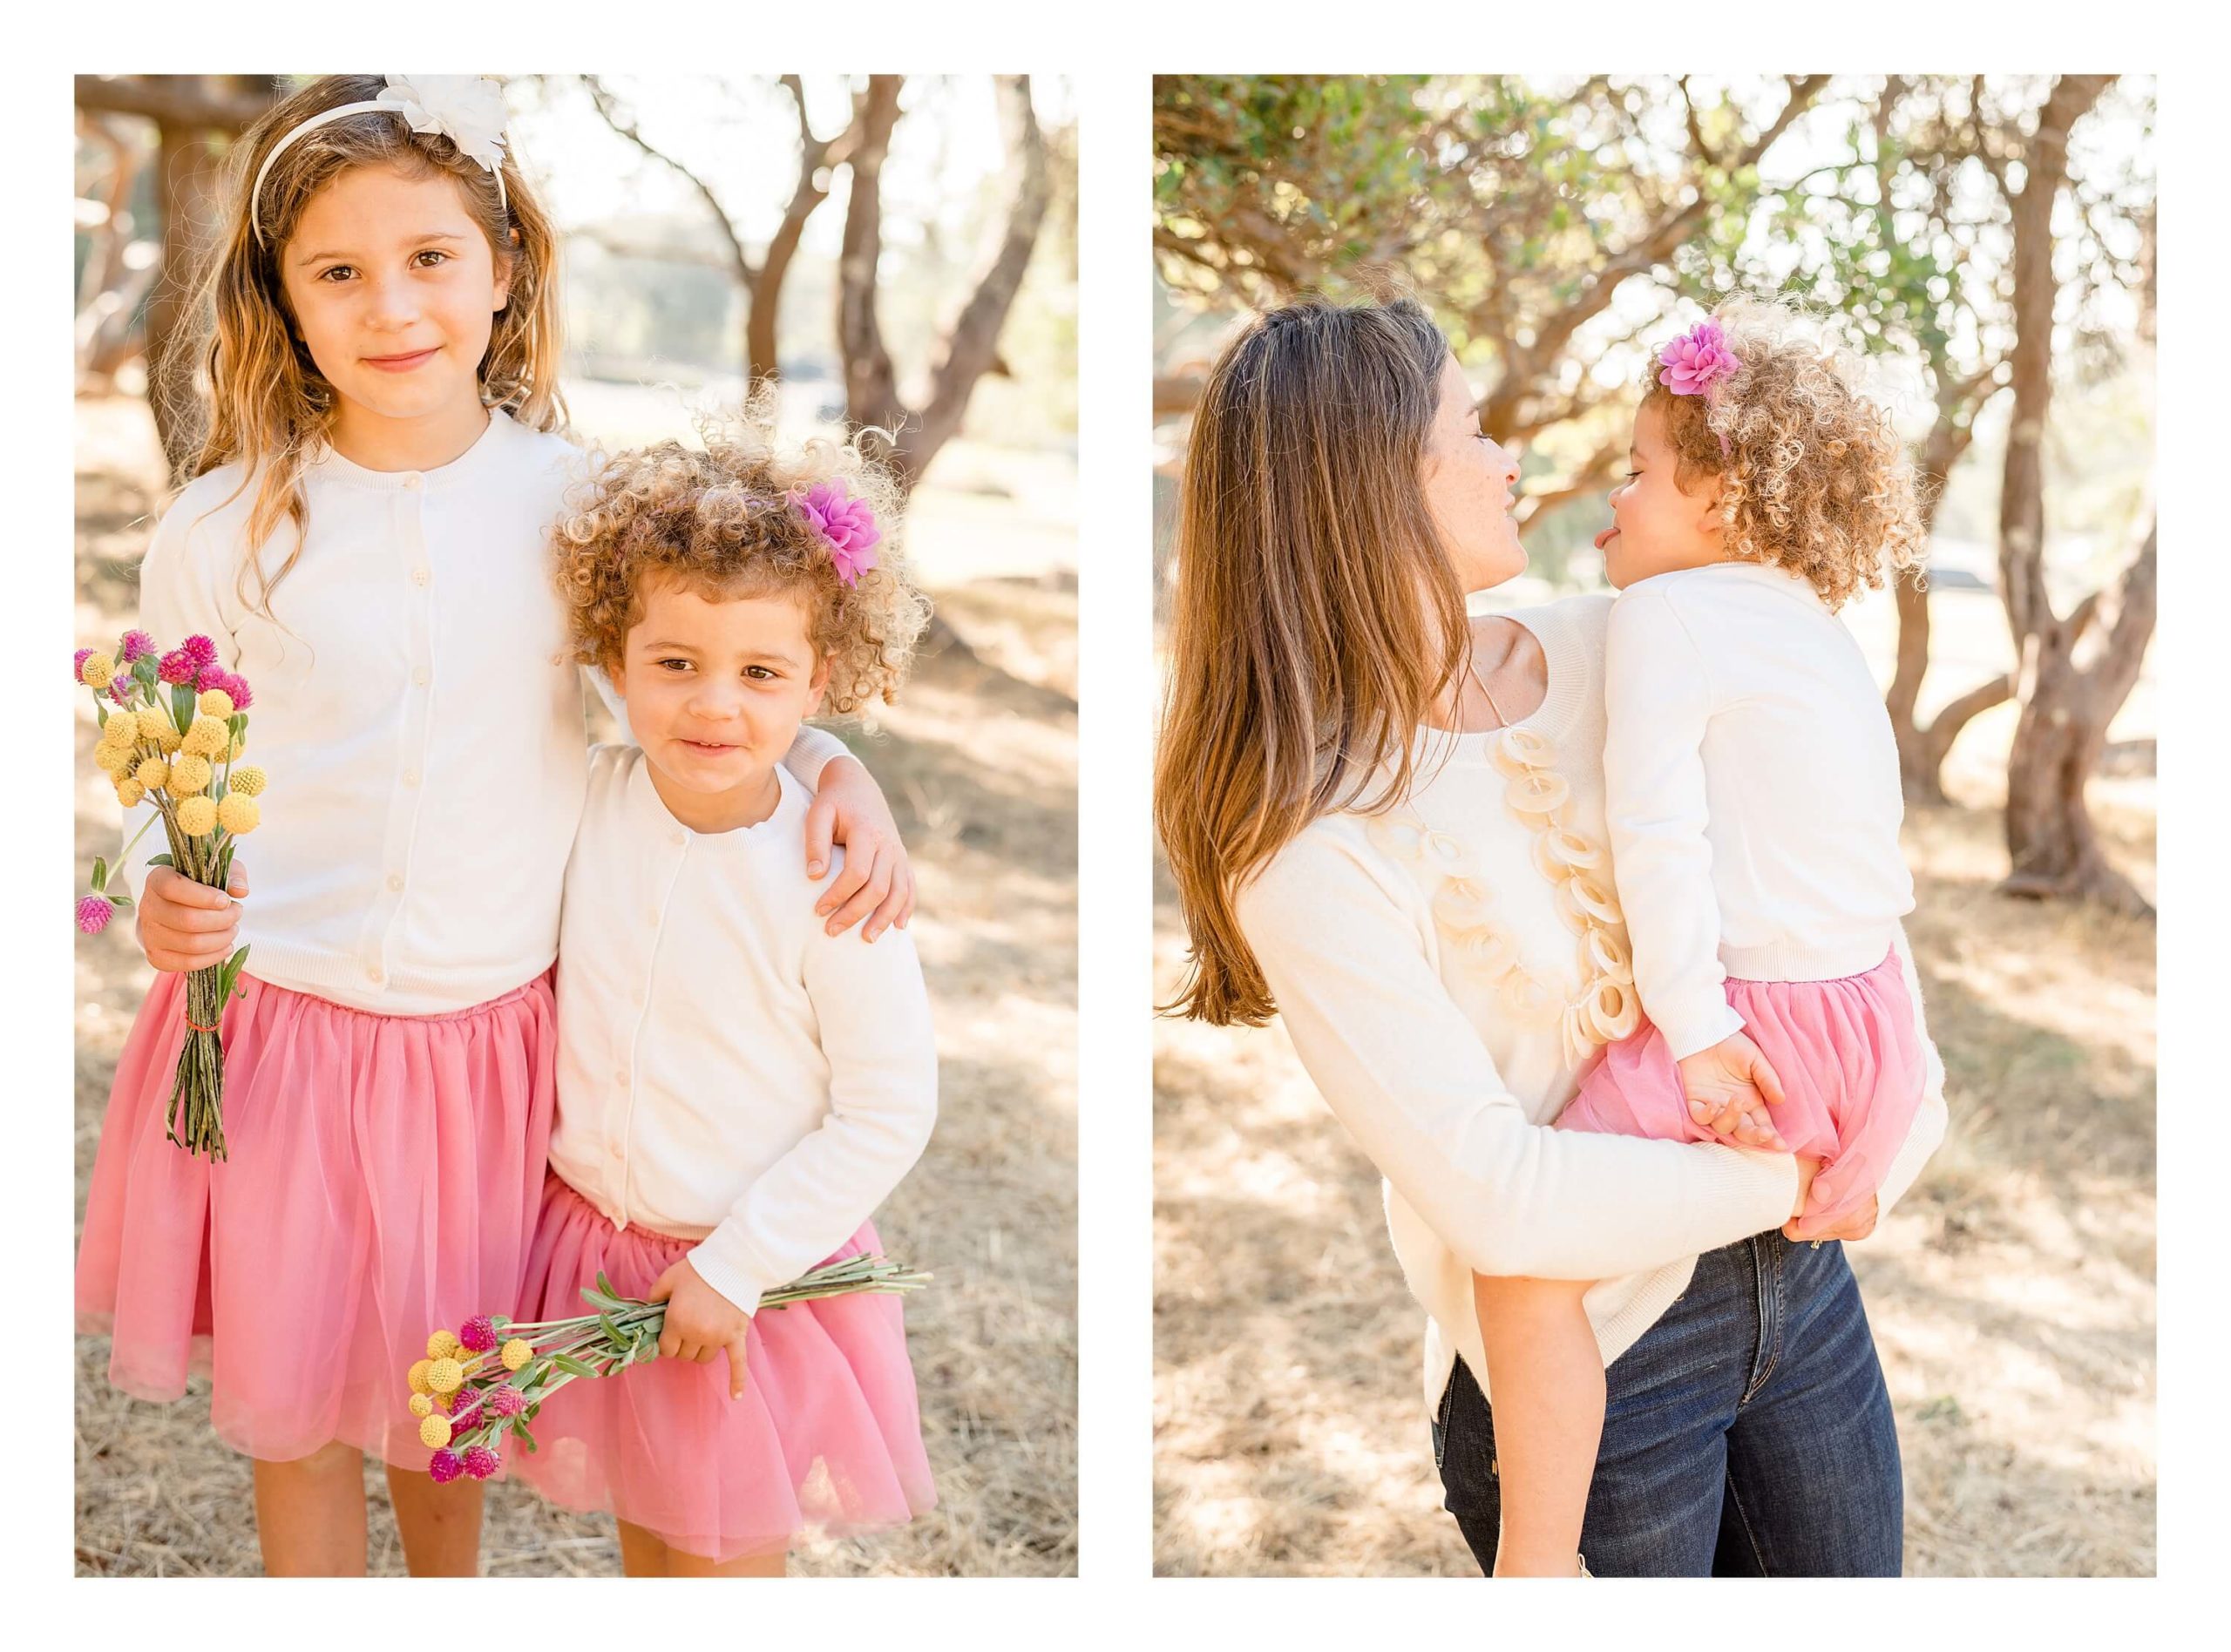 Left: Two sisters wearing pink tutus smile at the camera while holding small bouquets of flowers. Right: A mother holds her young daughter, who is playfully sticking out her tongue. 